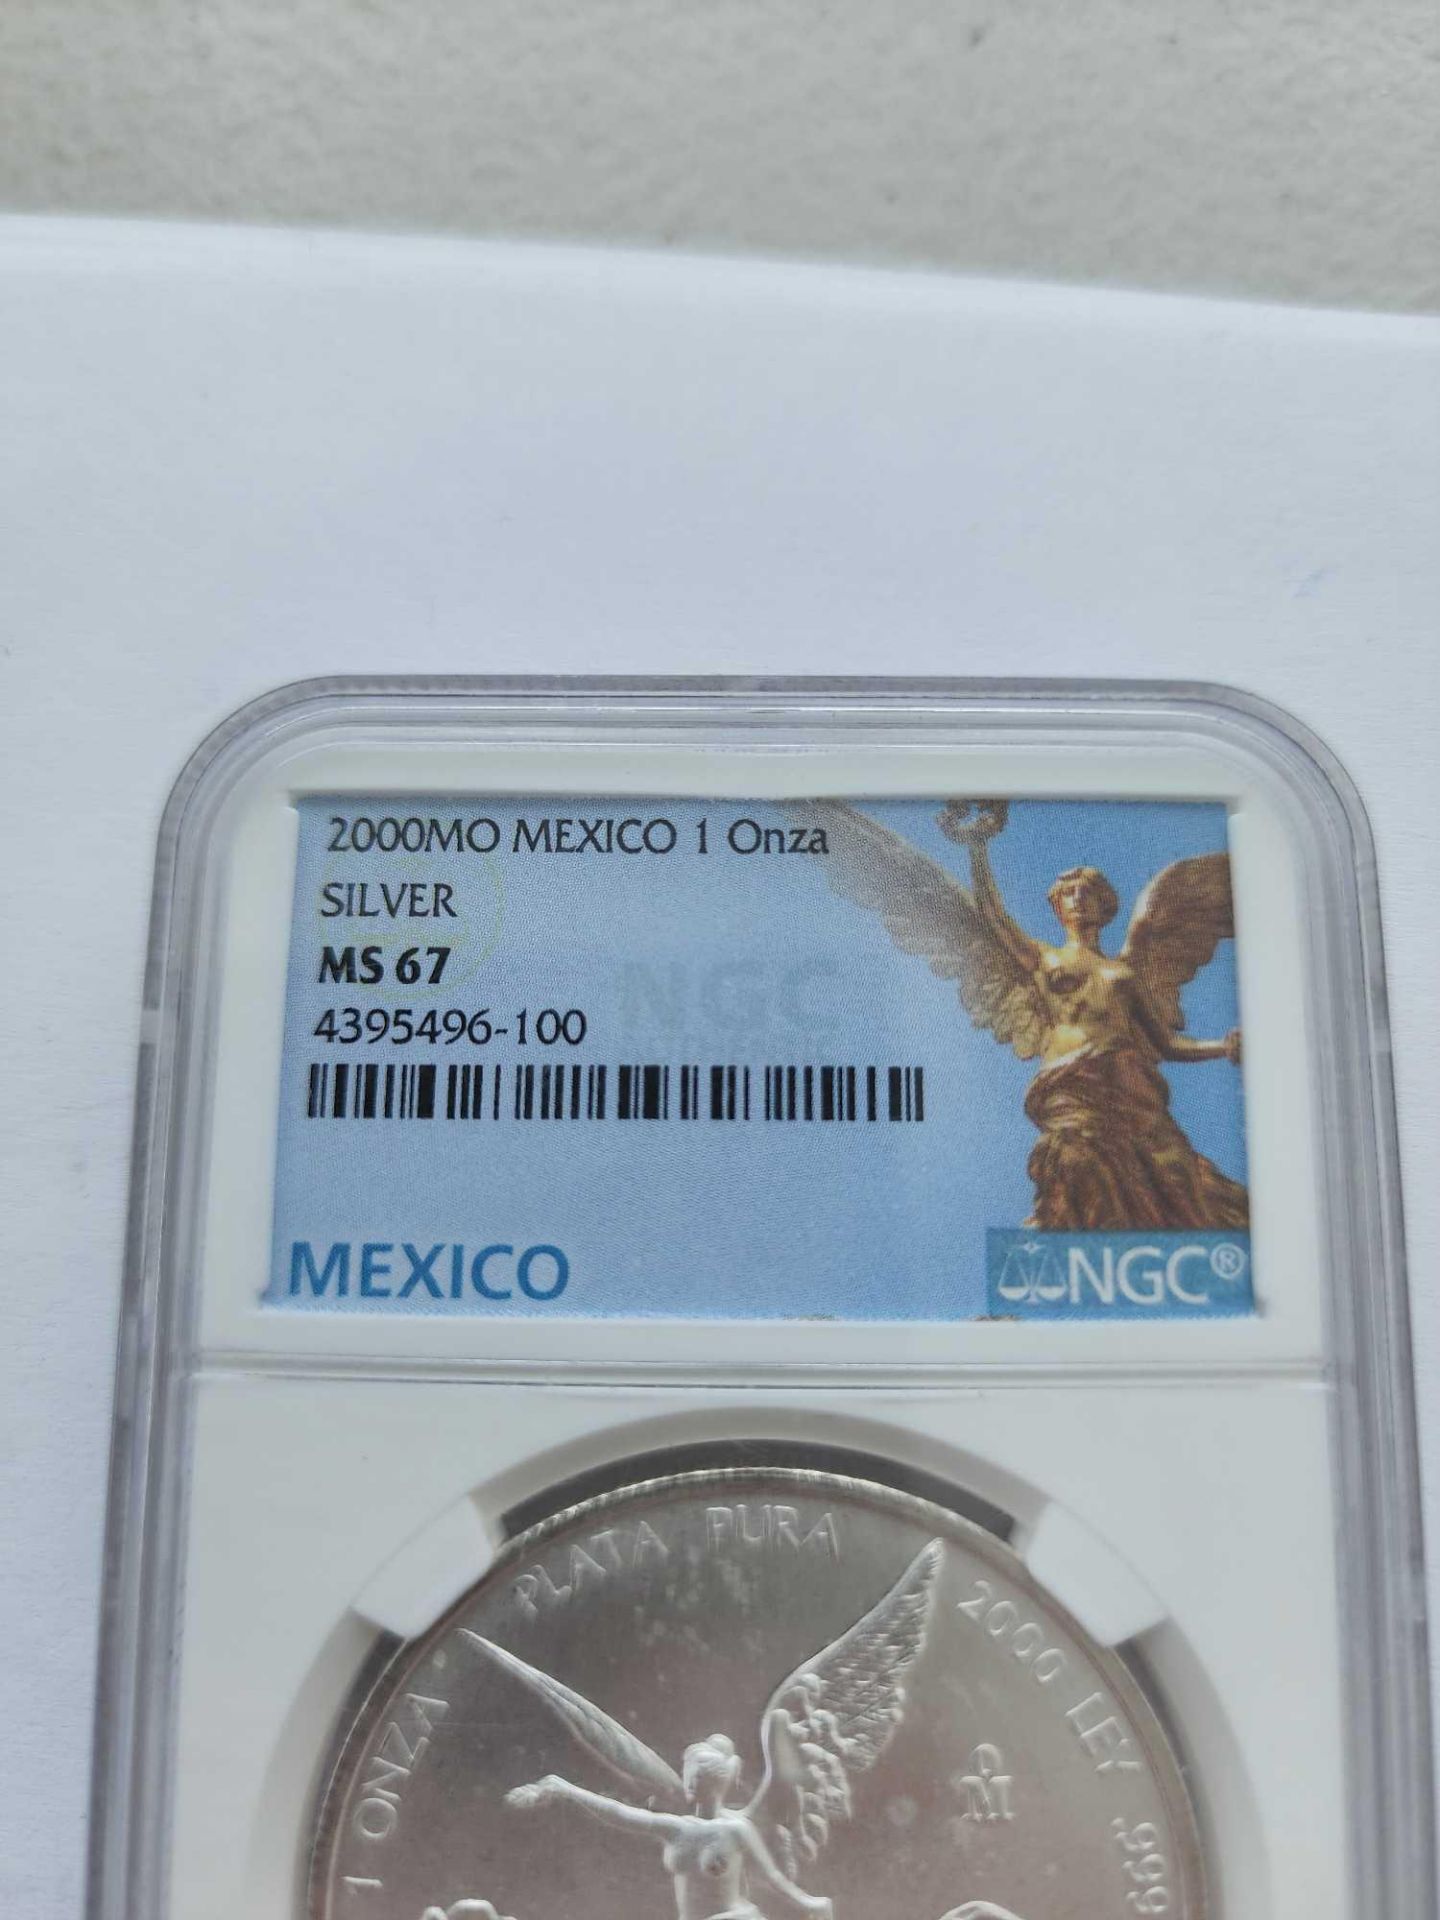 2000 Mexico 1 onza silver graded coin - Image 2 of 4